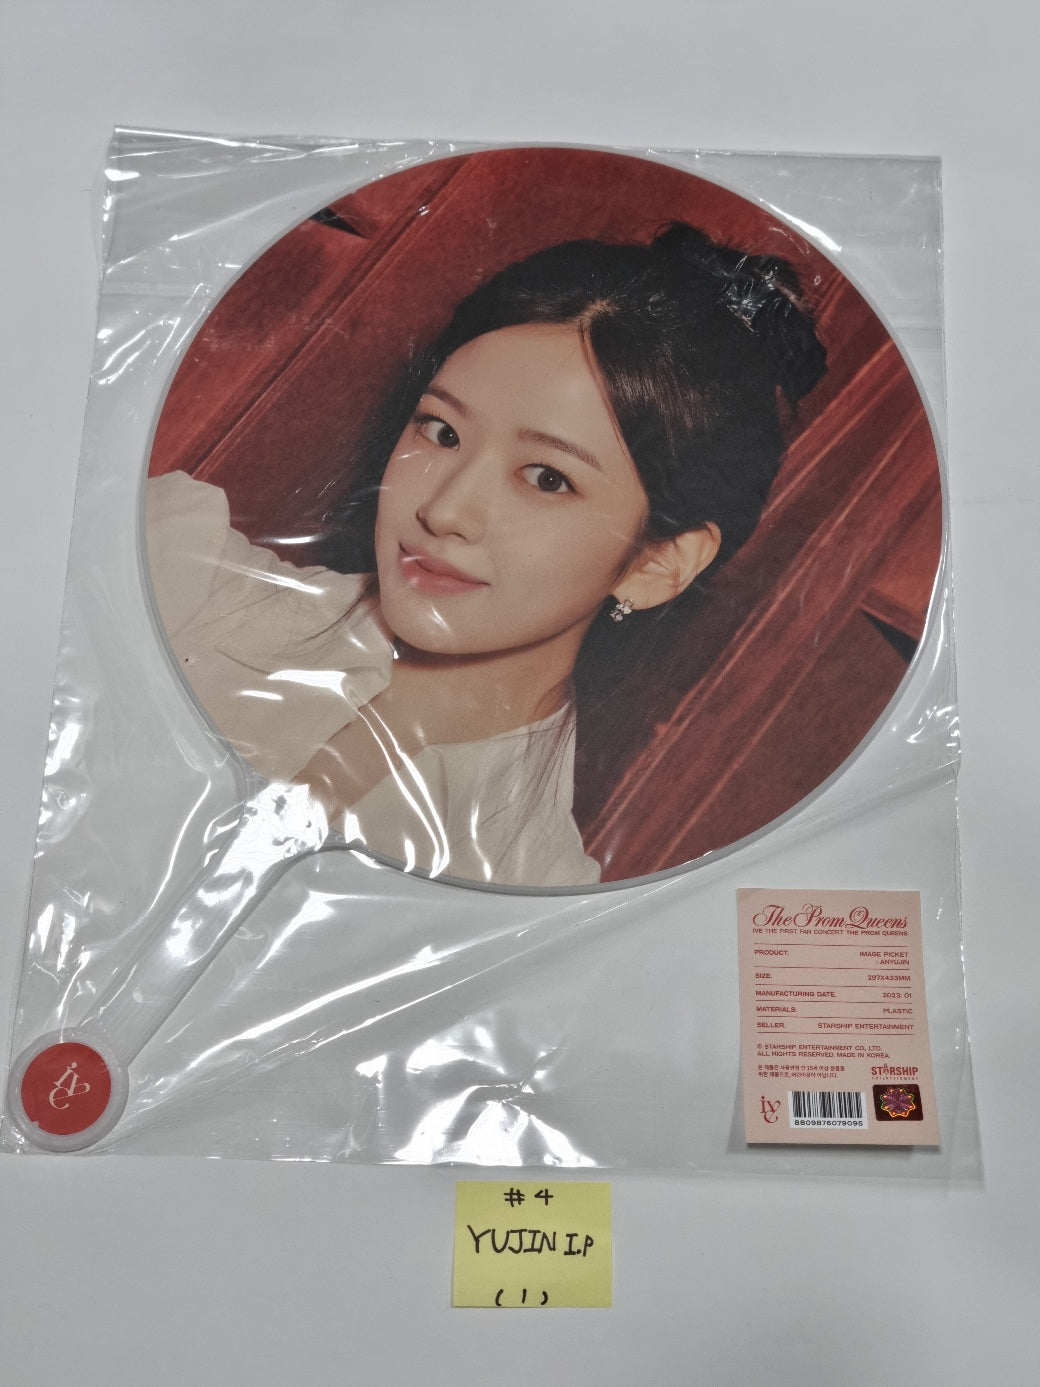 IVE "The Prom Queens" 1st Fan-Concert - Official MD [응원봉,포토 슬로건, 이미지 피켓]